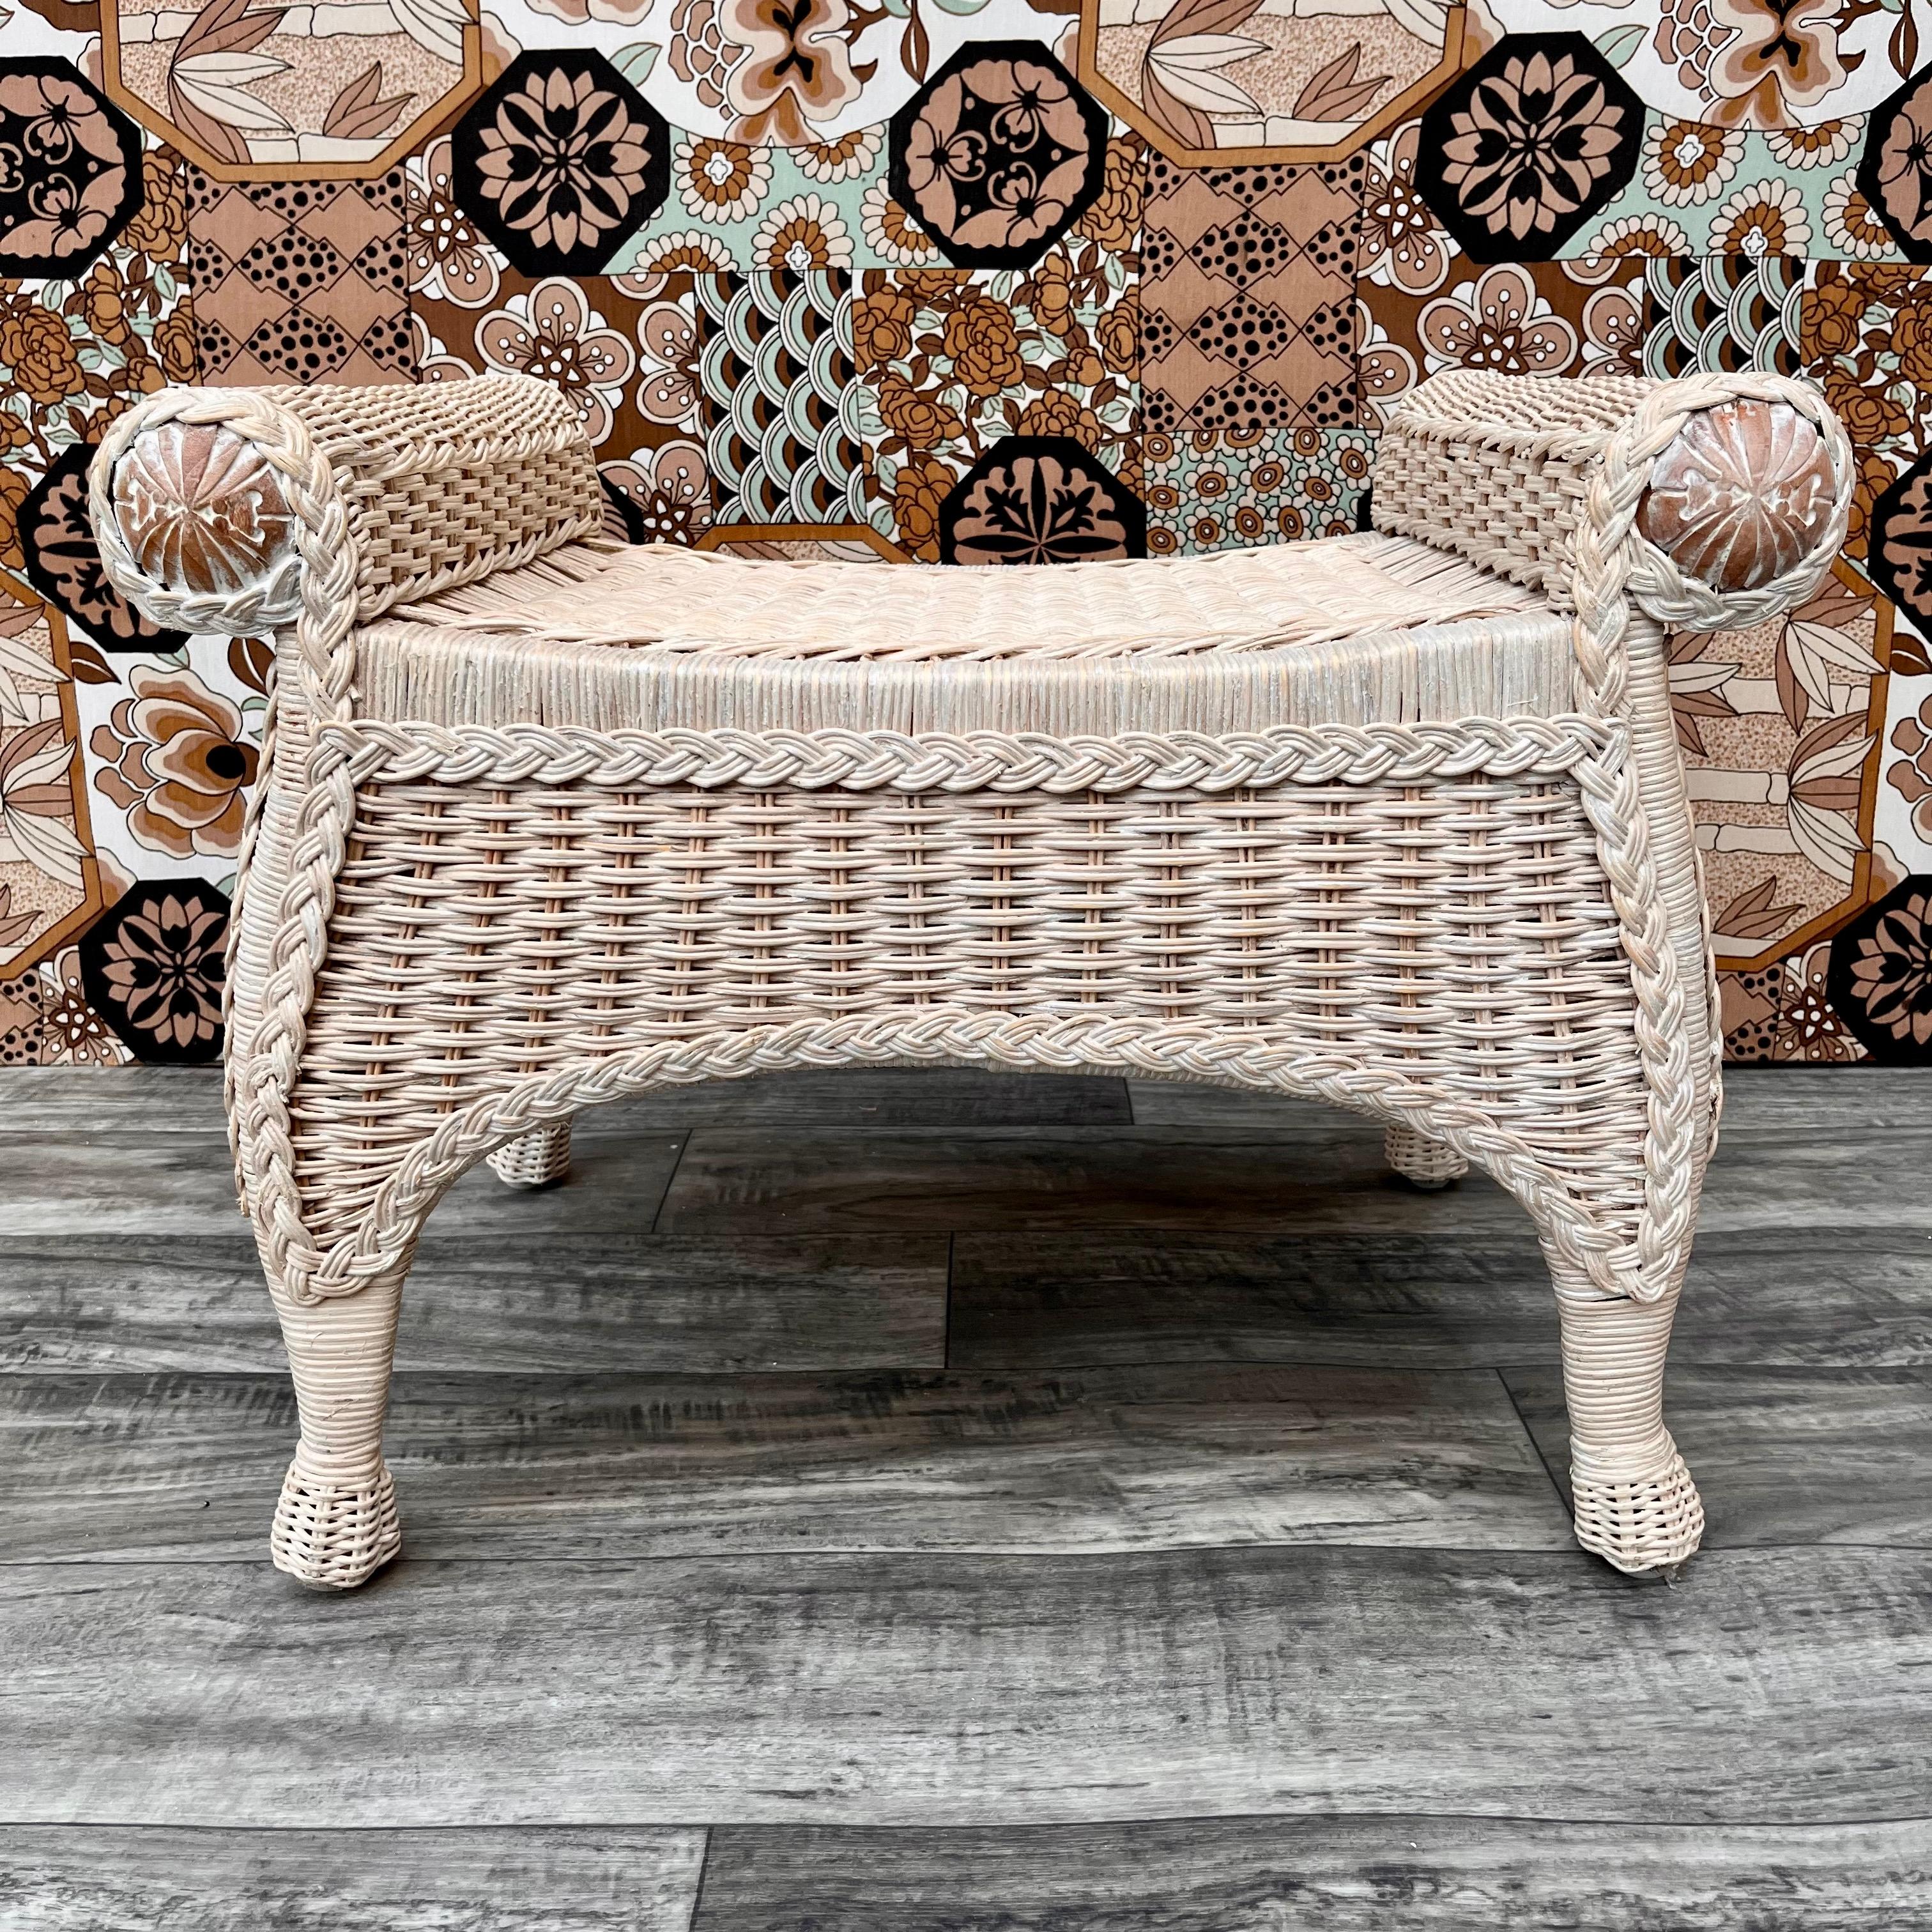 Late 20th Century Boho Chic Coastal Style Rattan Vanity Bench In Good Condition For Sale In Miami, FL